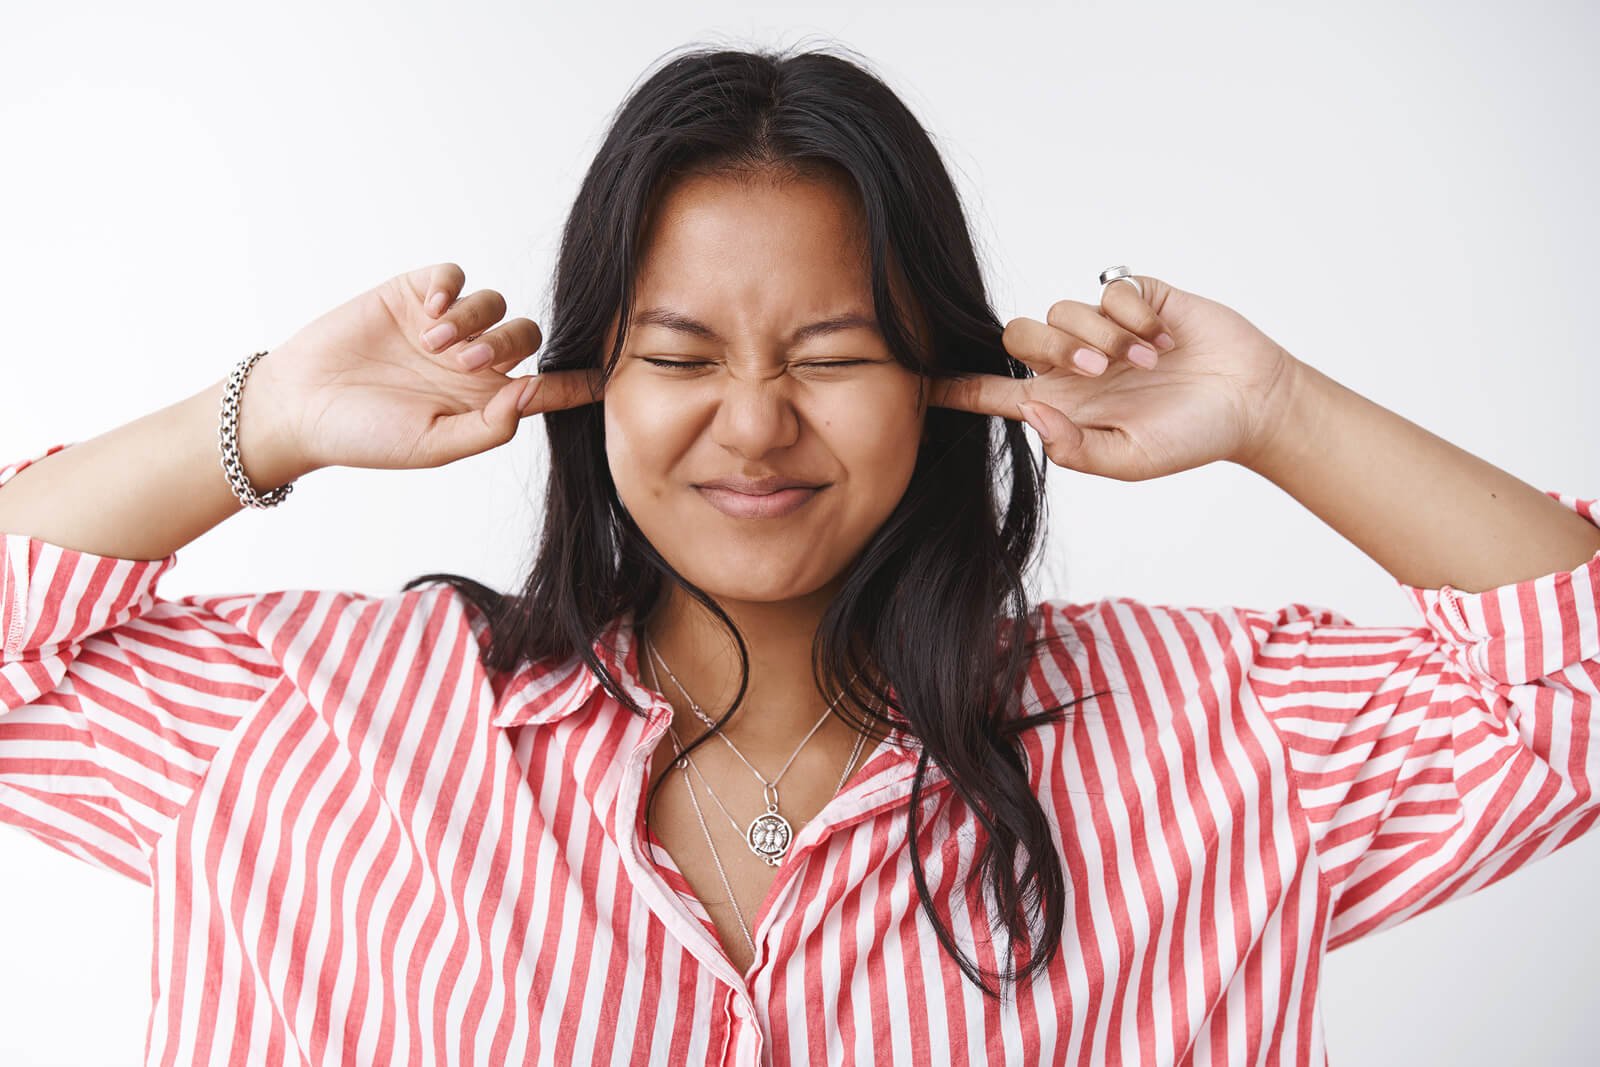 Does Hearing Loss Make You Sensitive To Loud Sounds?